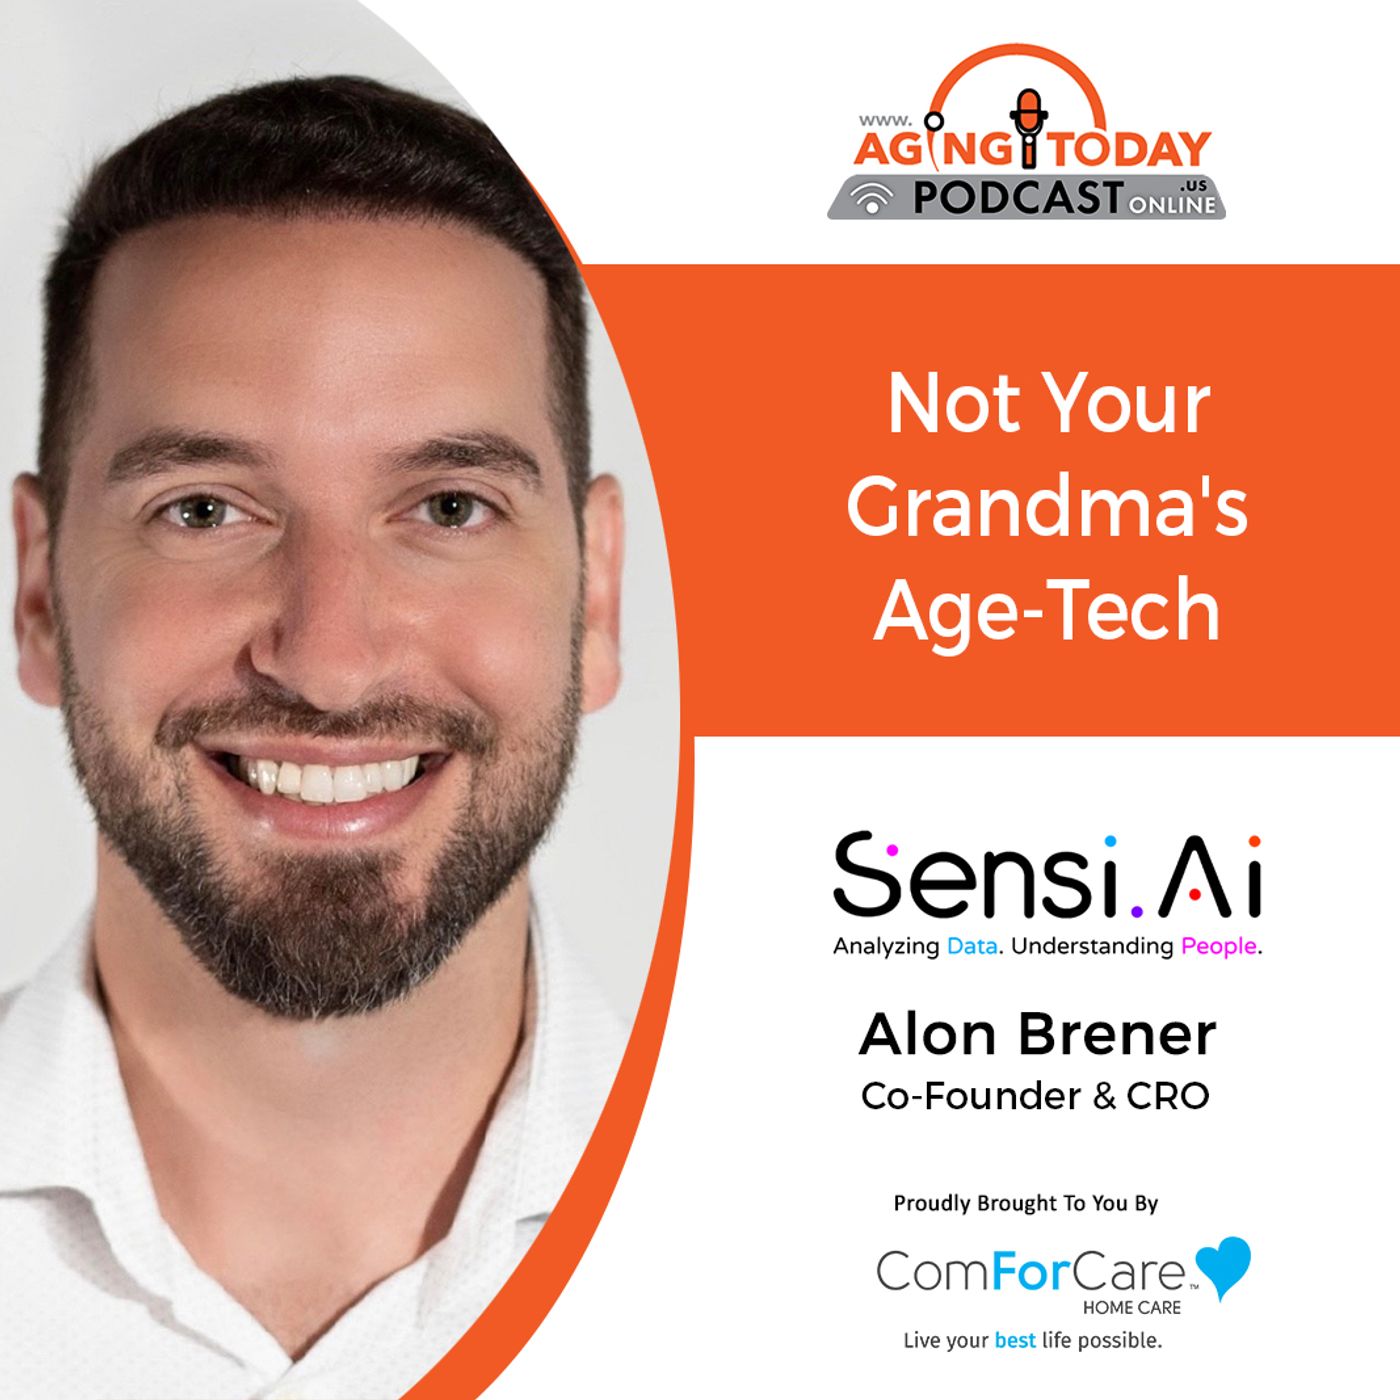 2/13/23: Alon Brener, Co-Founder & CRO of Sensi.Ai | Not Your Grandma's Age-Tech | Aging Today Podcast with Mark Turnbull from ComForCare